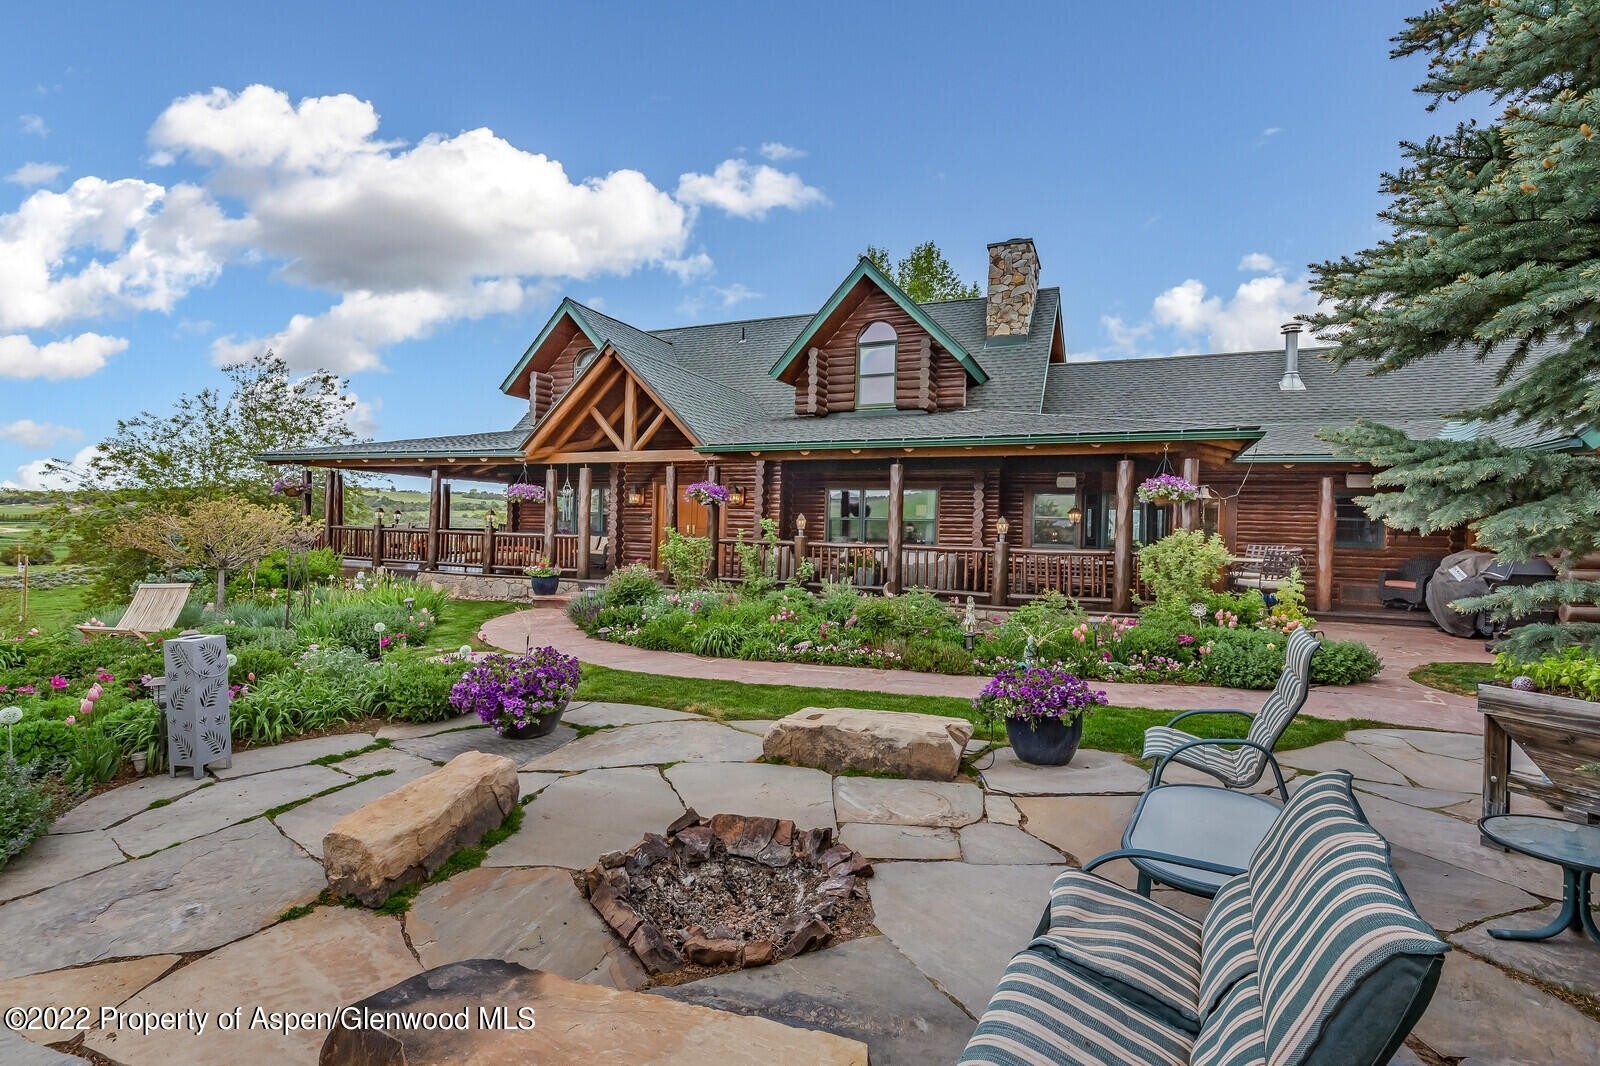 Property at Carbondale, CO 81623